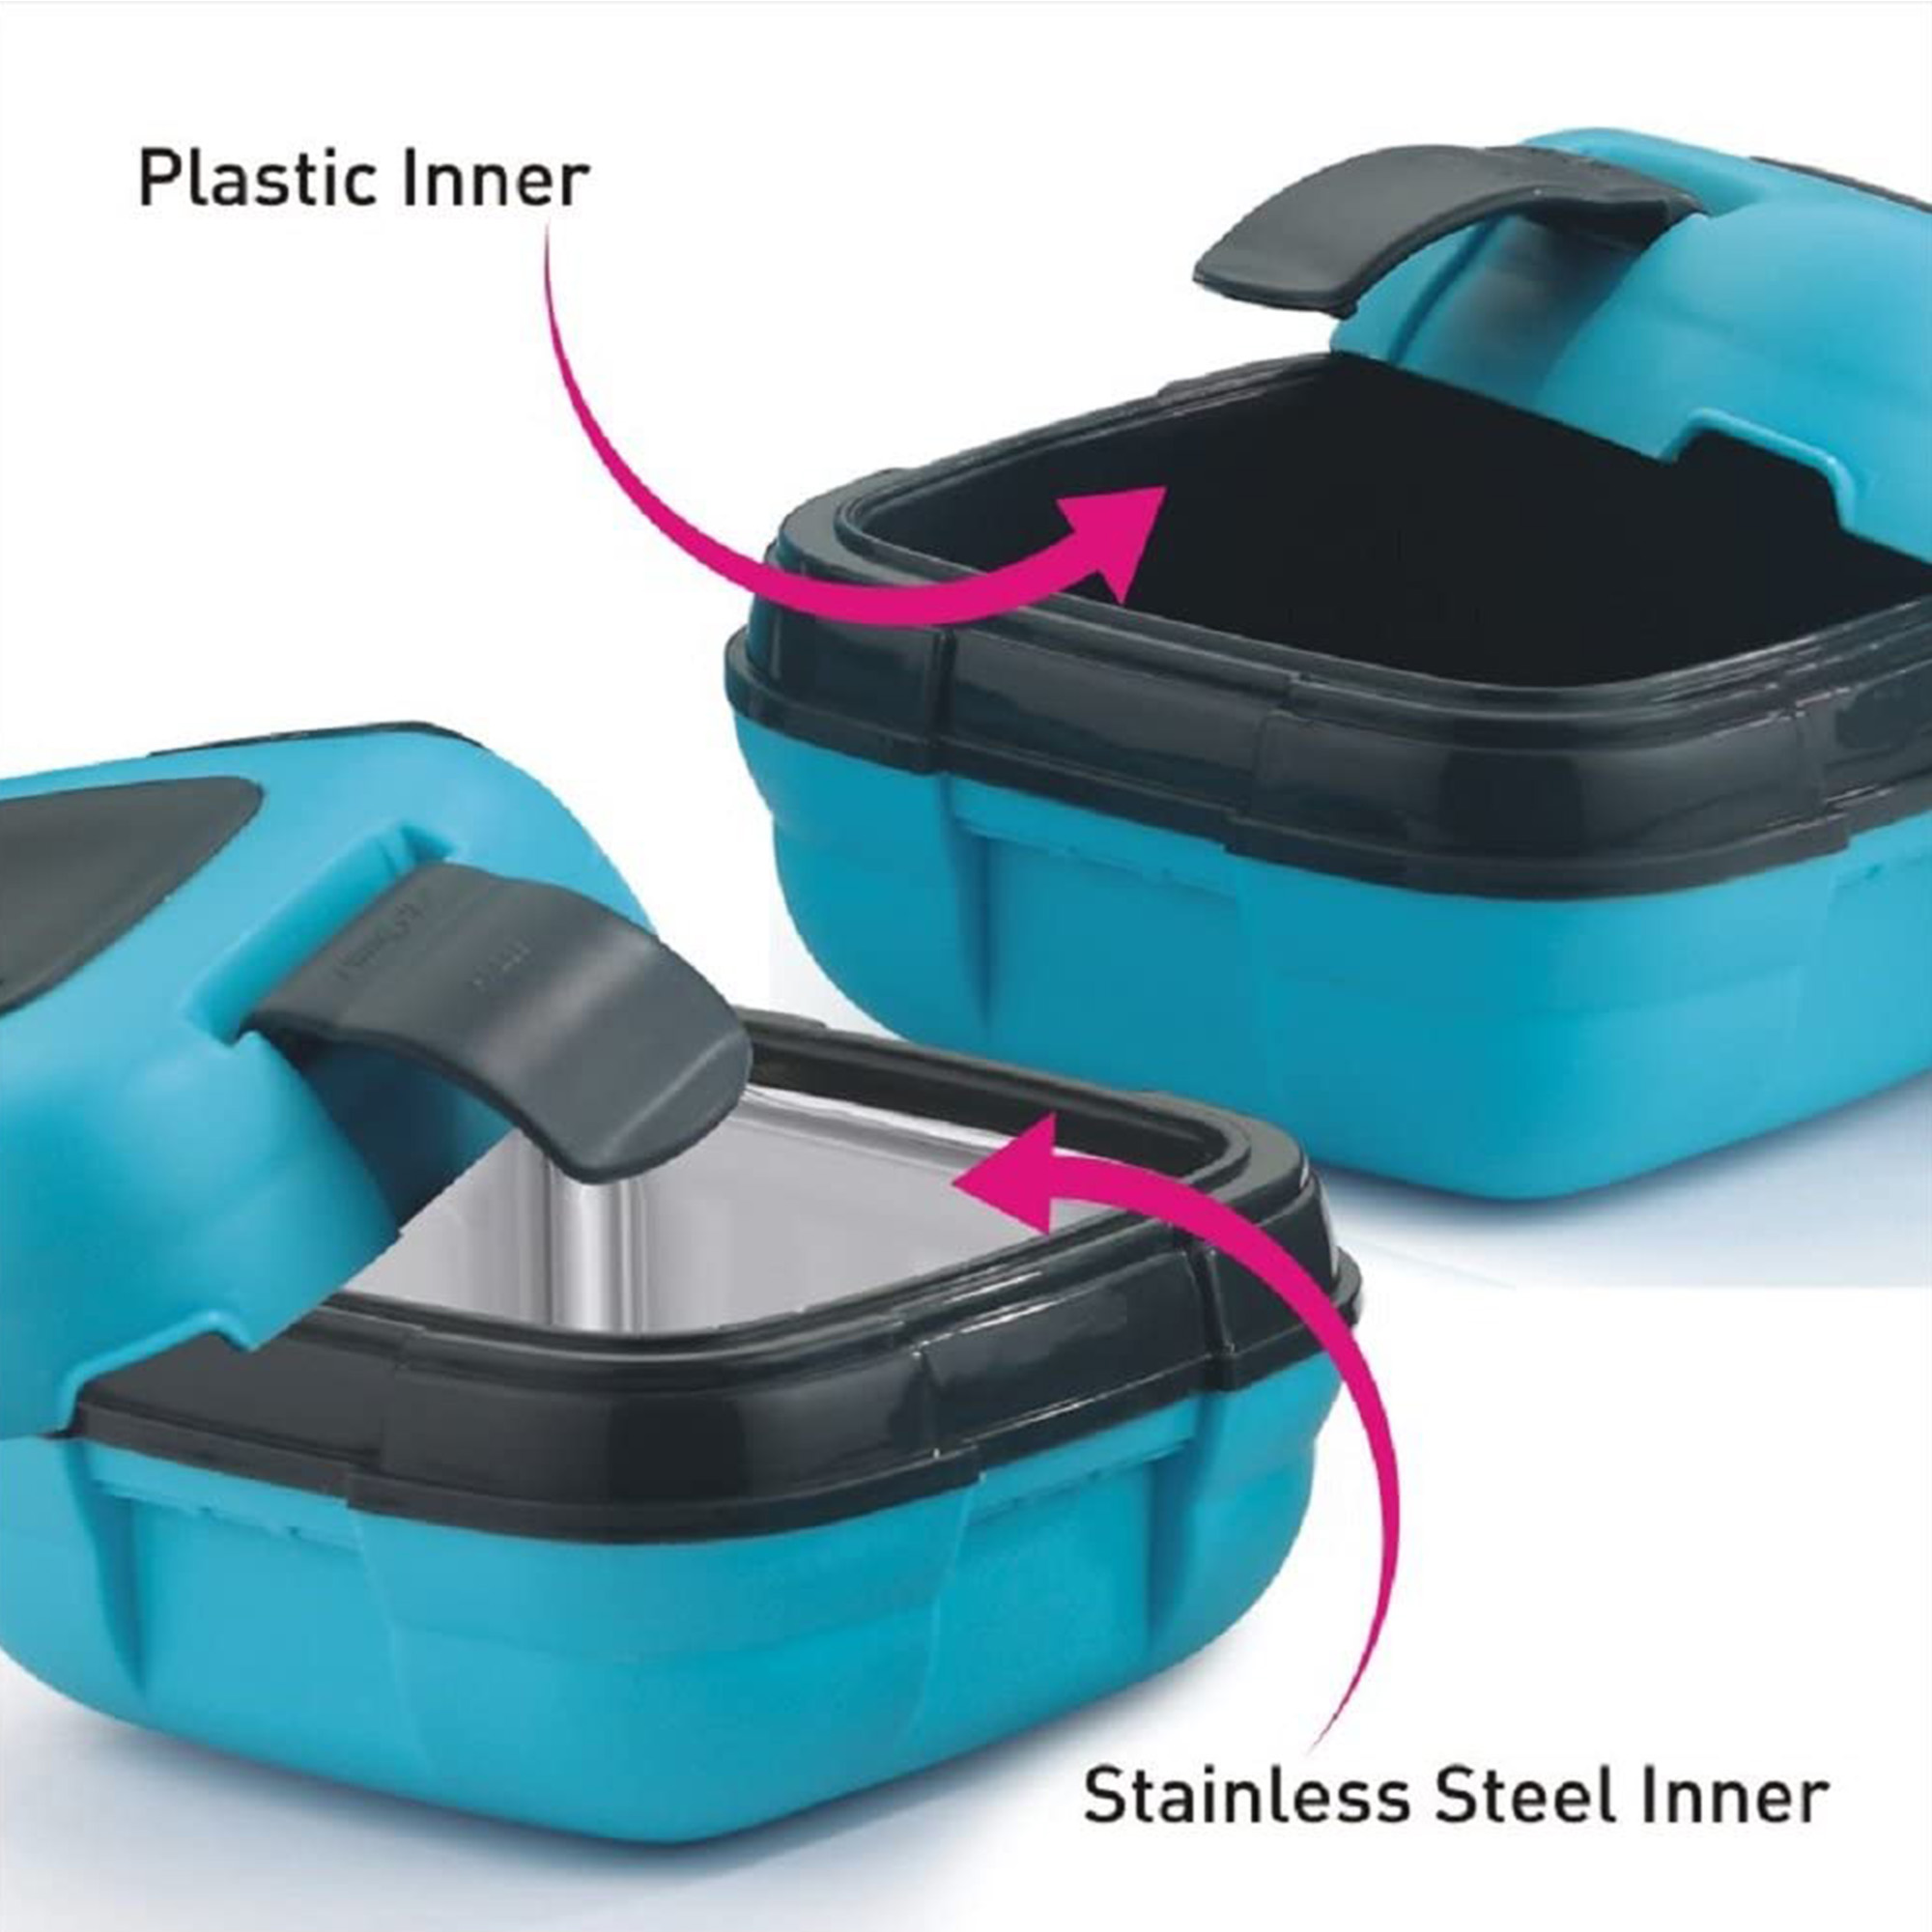 Pinnacle Thermoware Thermal Lunch Box Set Lunch Containers for Adults & Kids, Blue - image 2 of 9